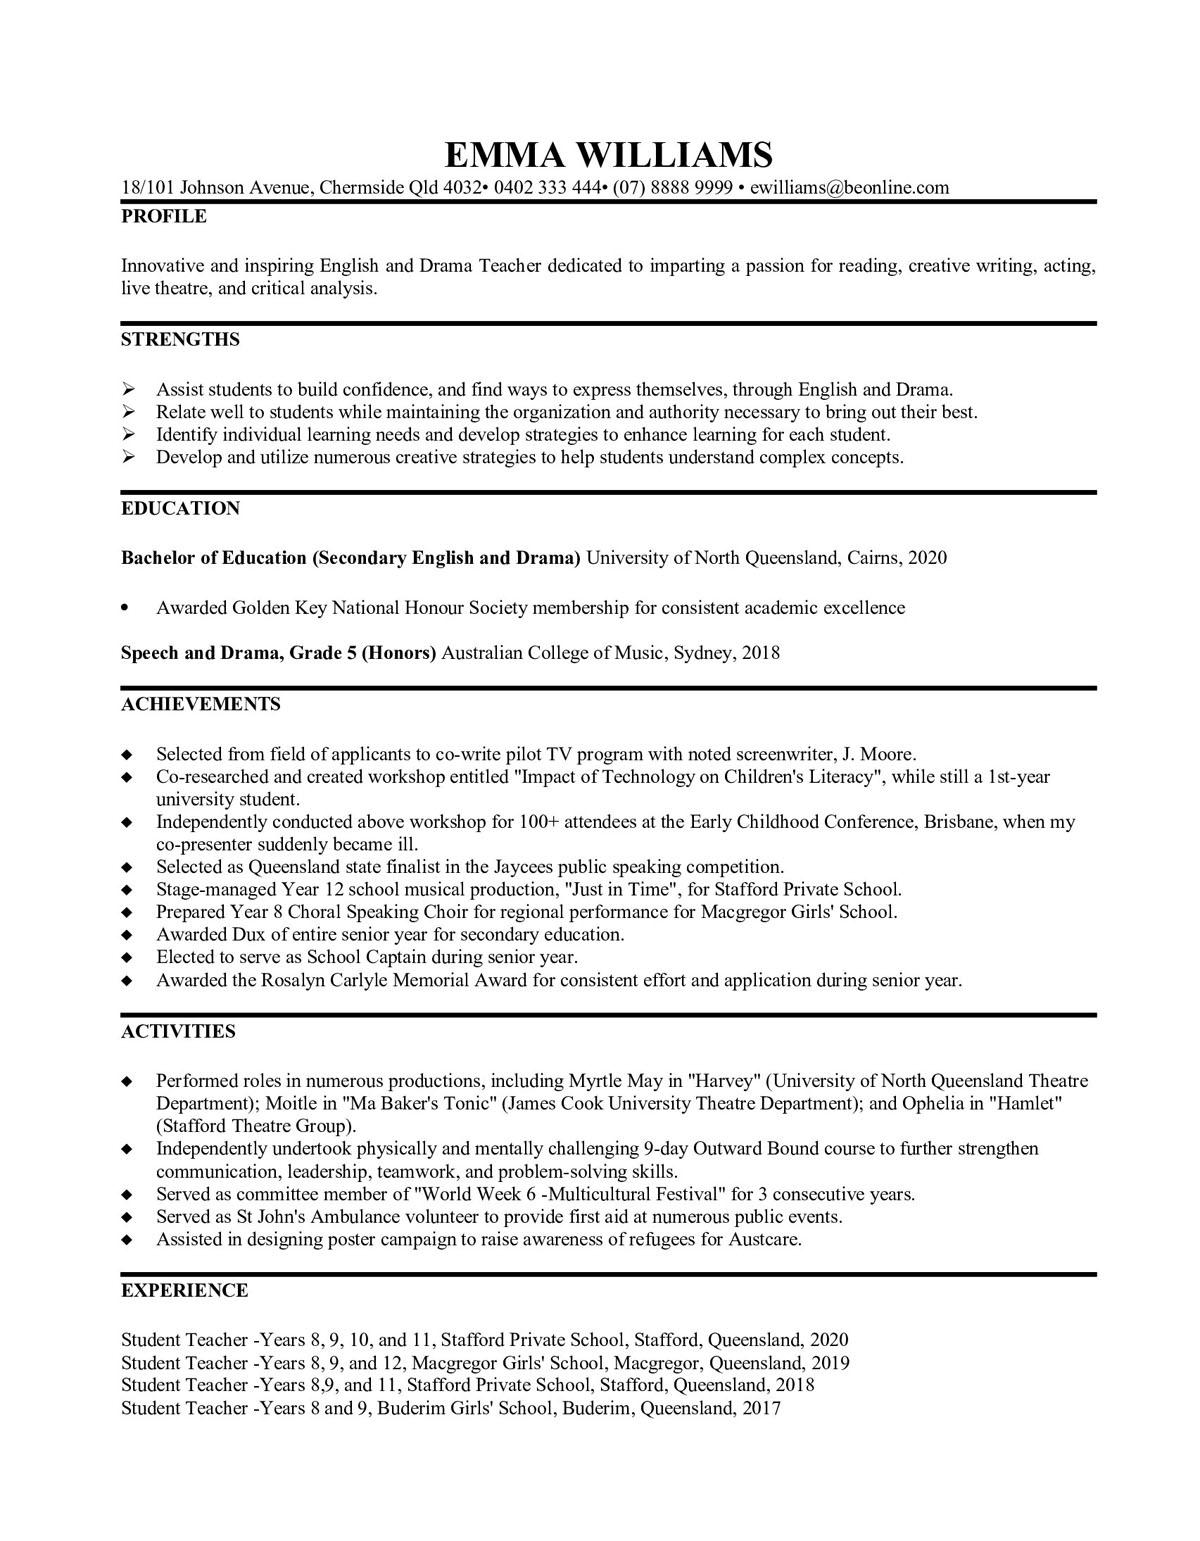 Sample resume: Secondary Education, Entry Level, Functional